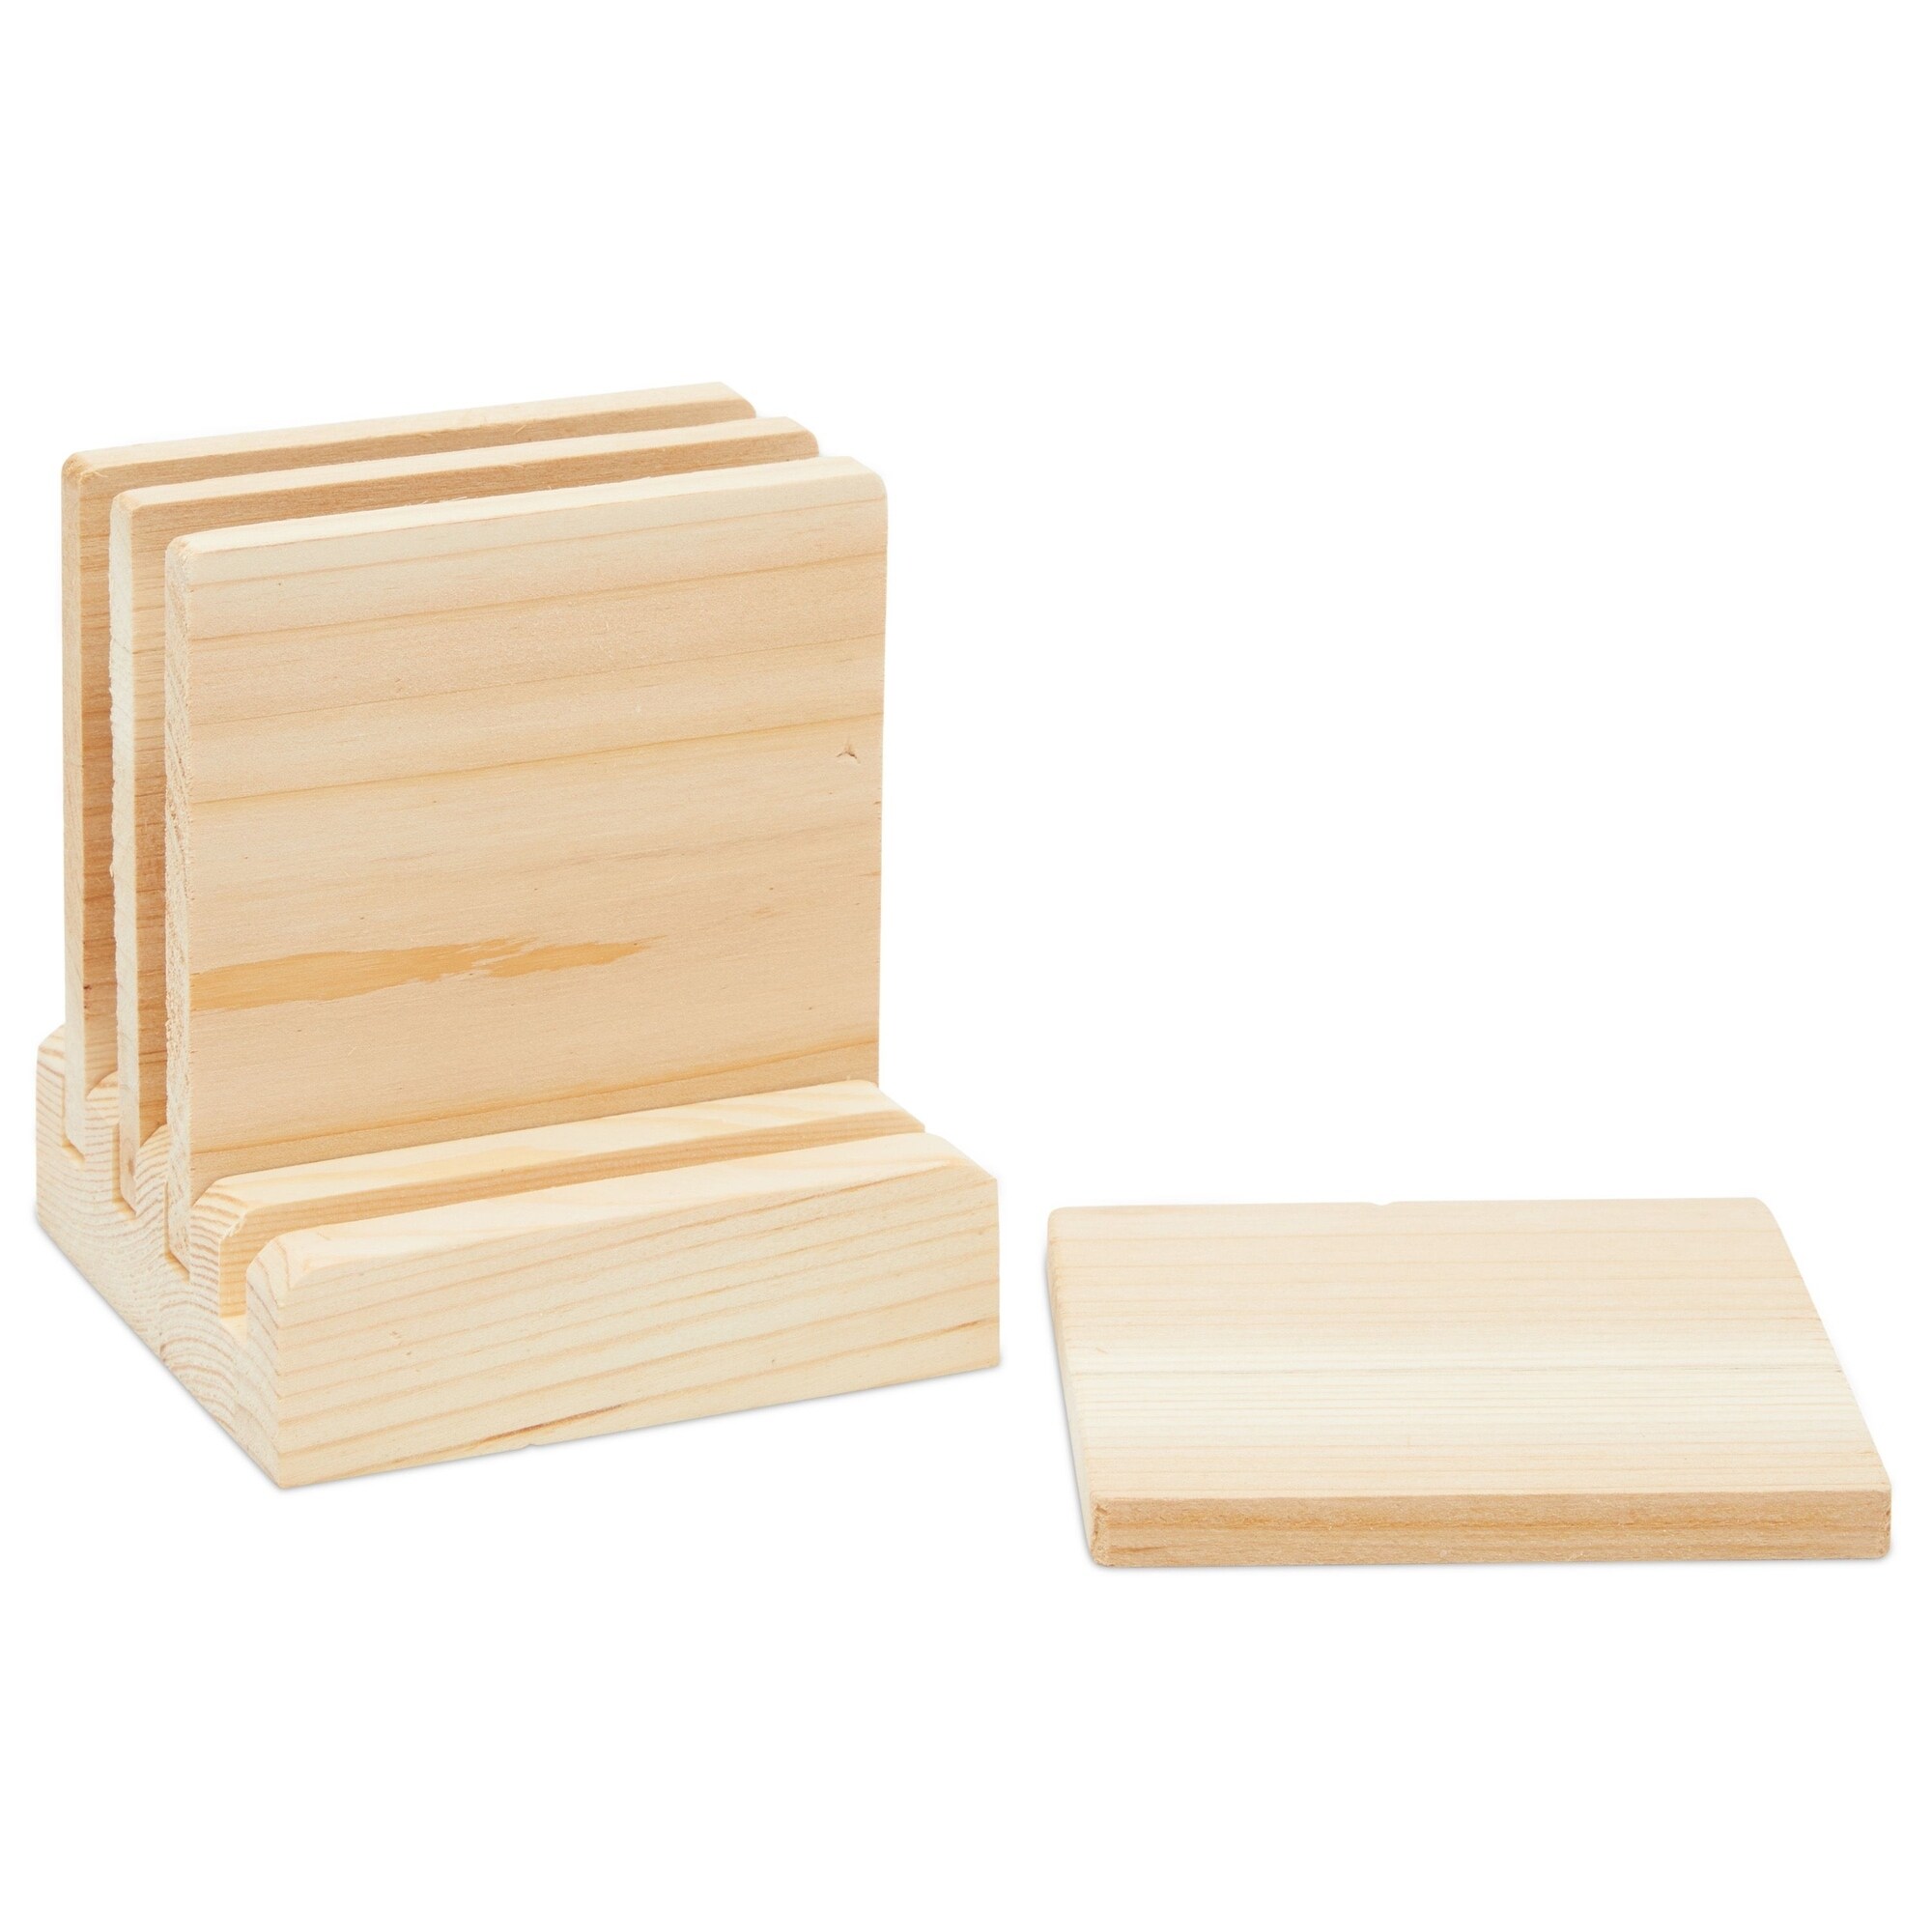 15 Pack Unfinished 4x4 Wood Squares for Crafts, Blank Wooden Tiles for  Burning, Engraving, DIY Coasters